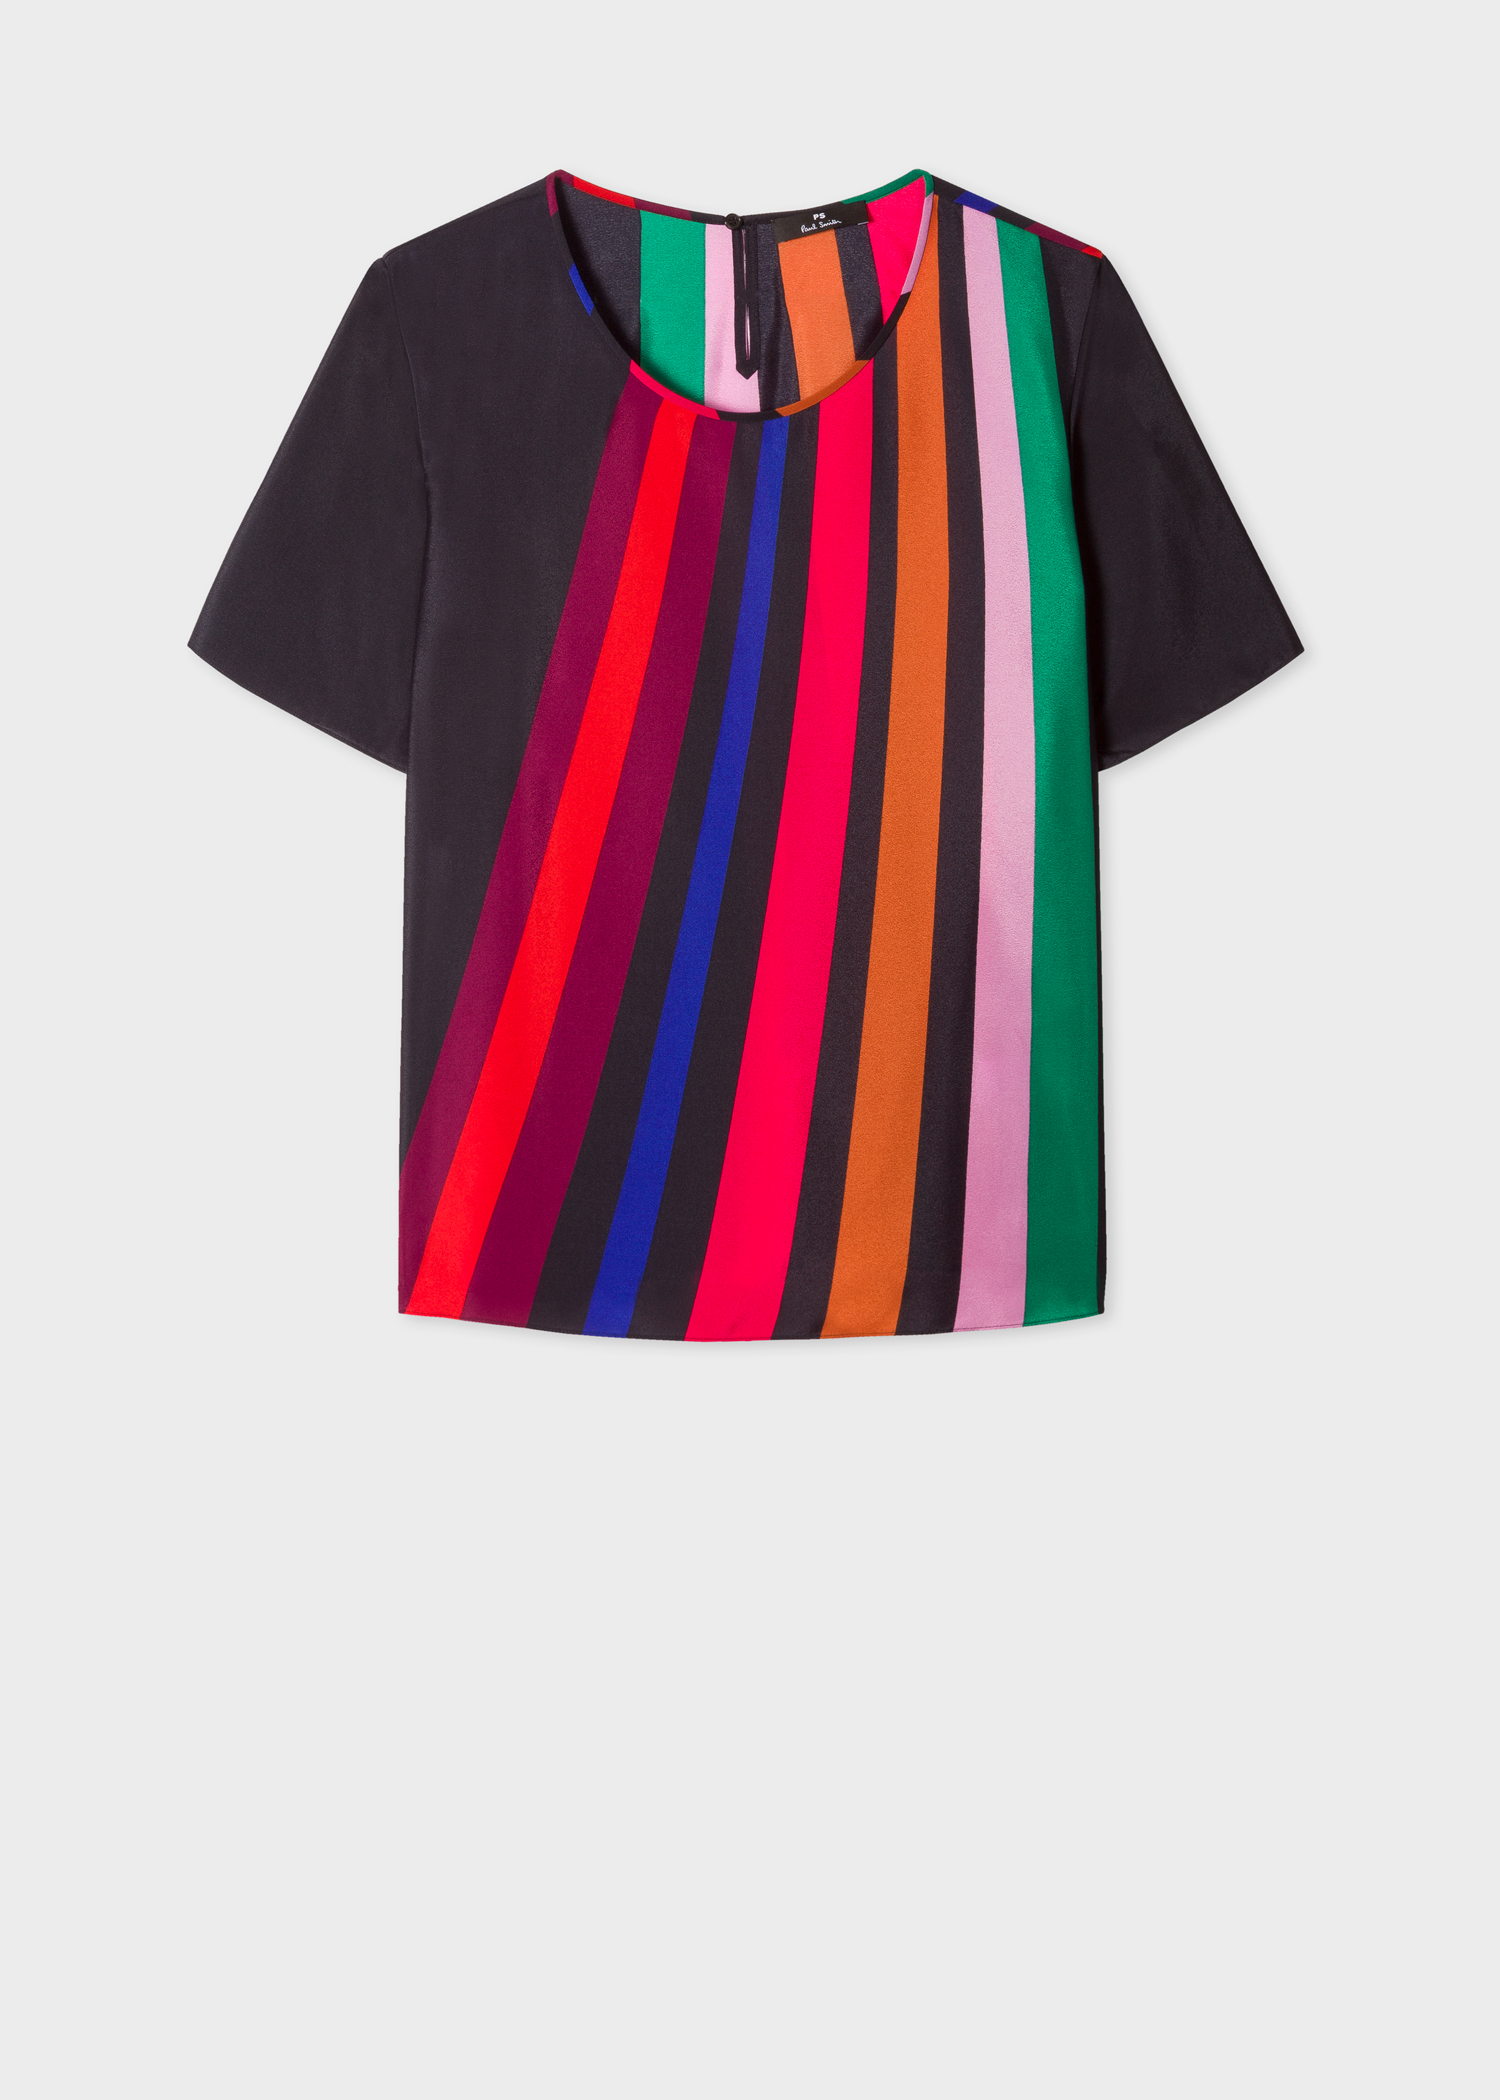 Front view - Women's Black 'Live Faster Stripe' Top Paul Smith